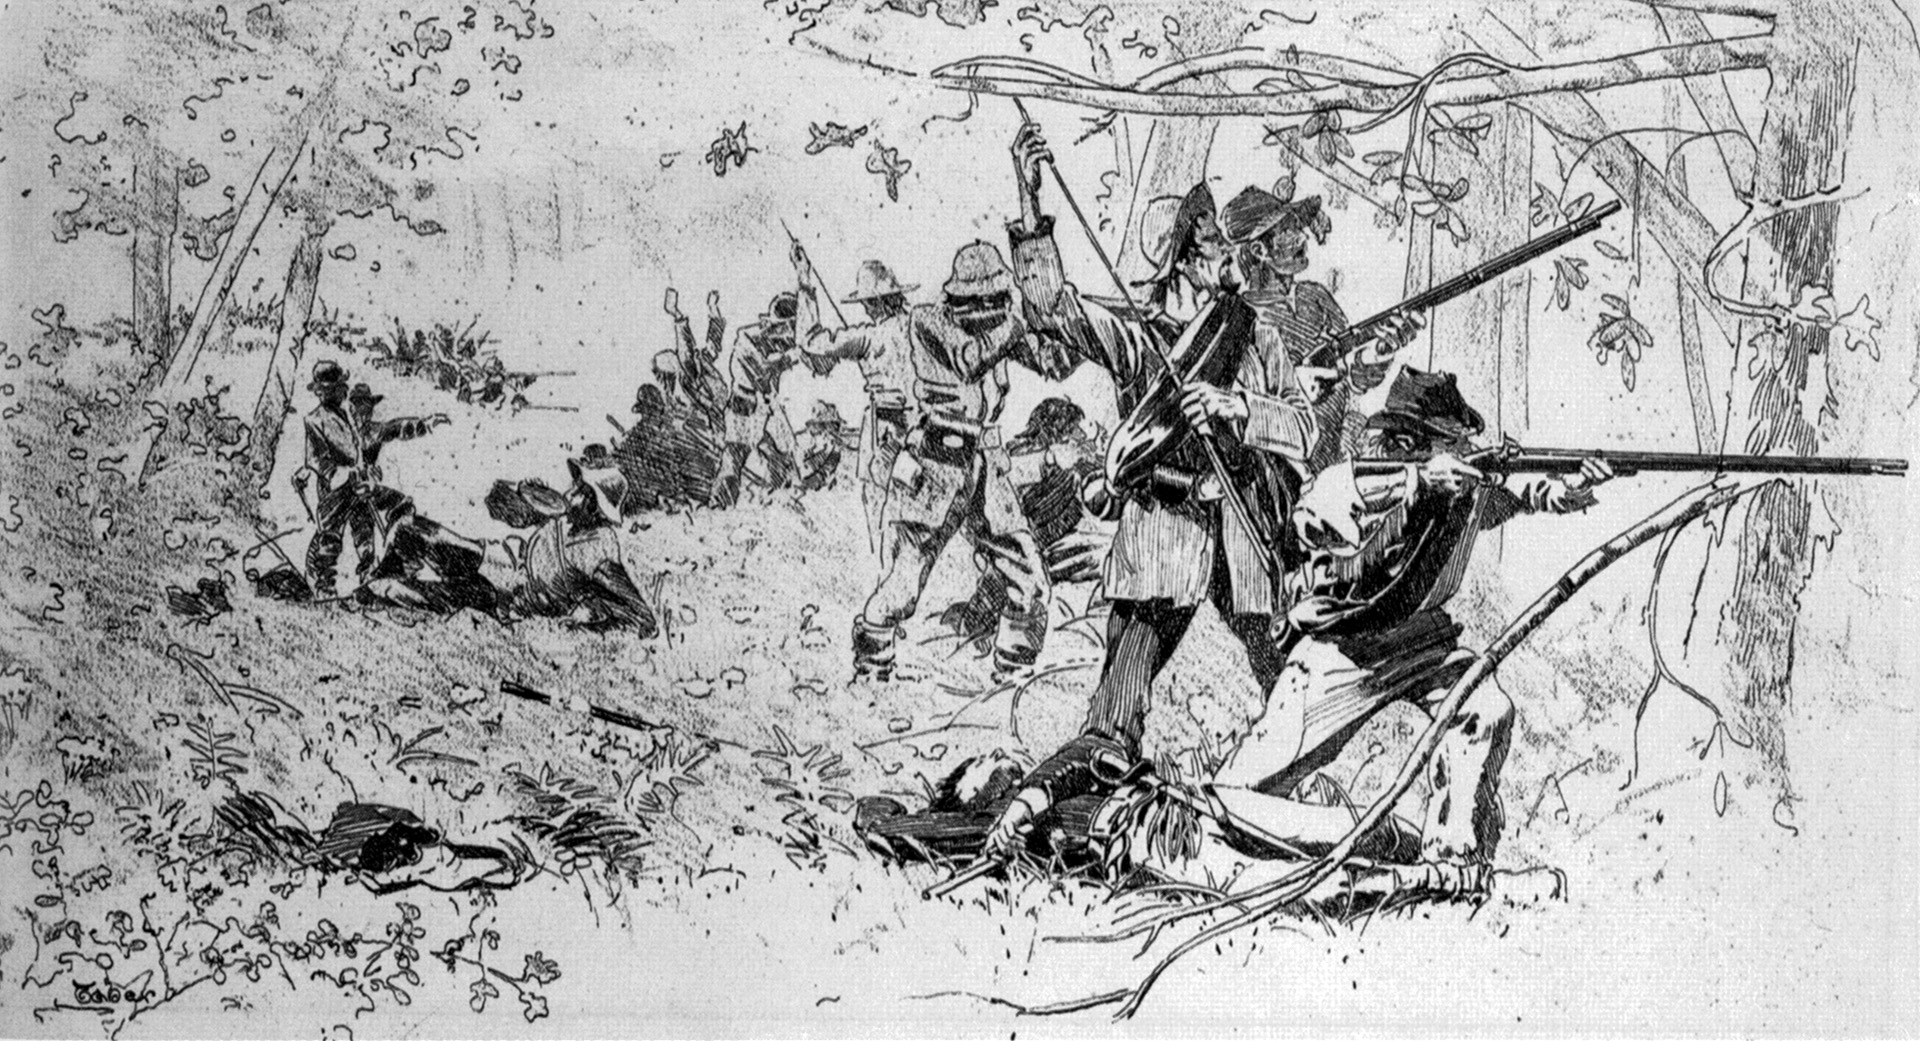 Savage fighting in thick woods occurred throughout the first day of the battle.